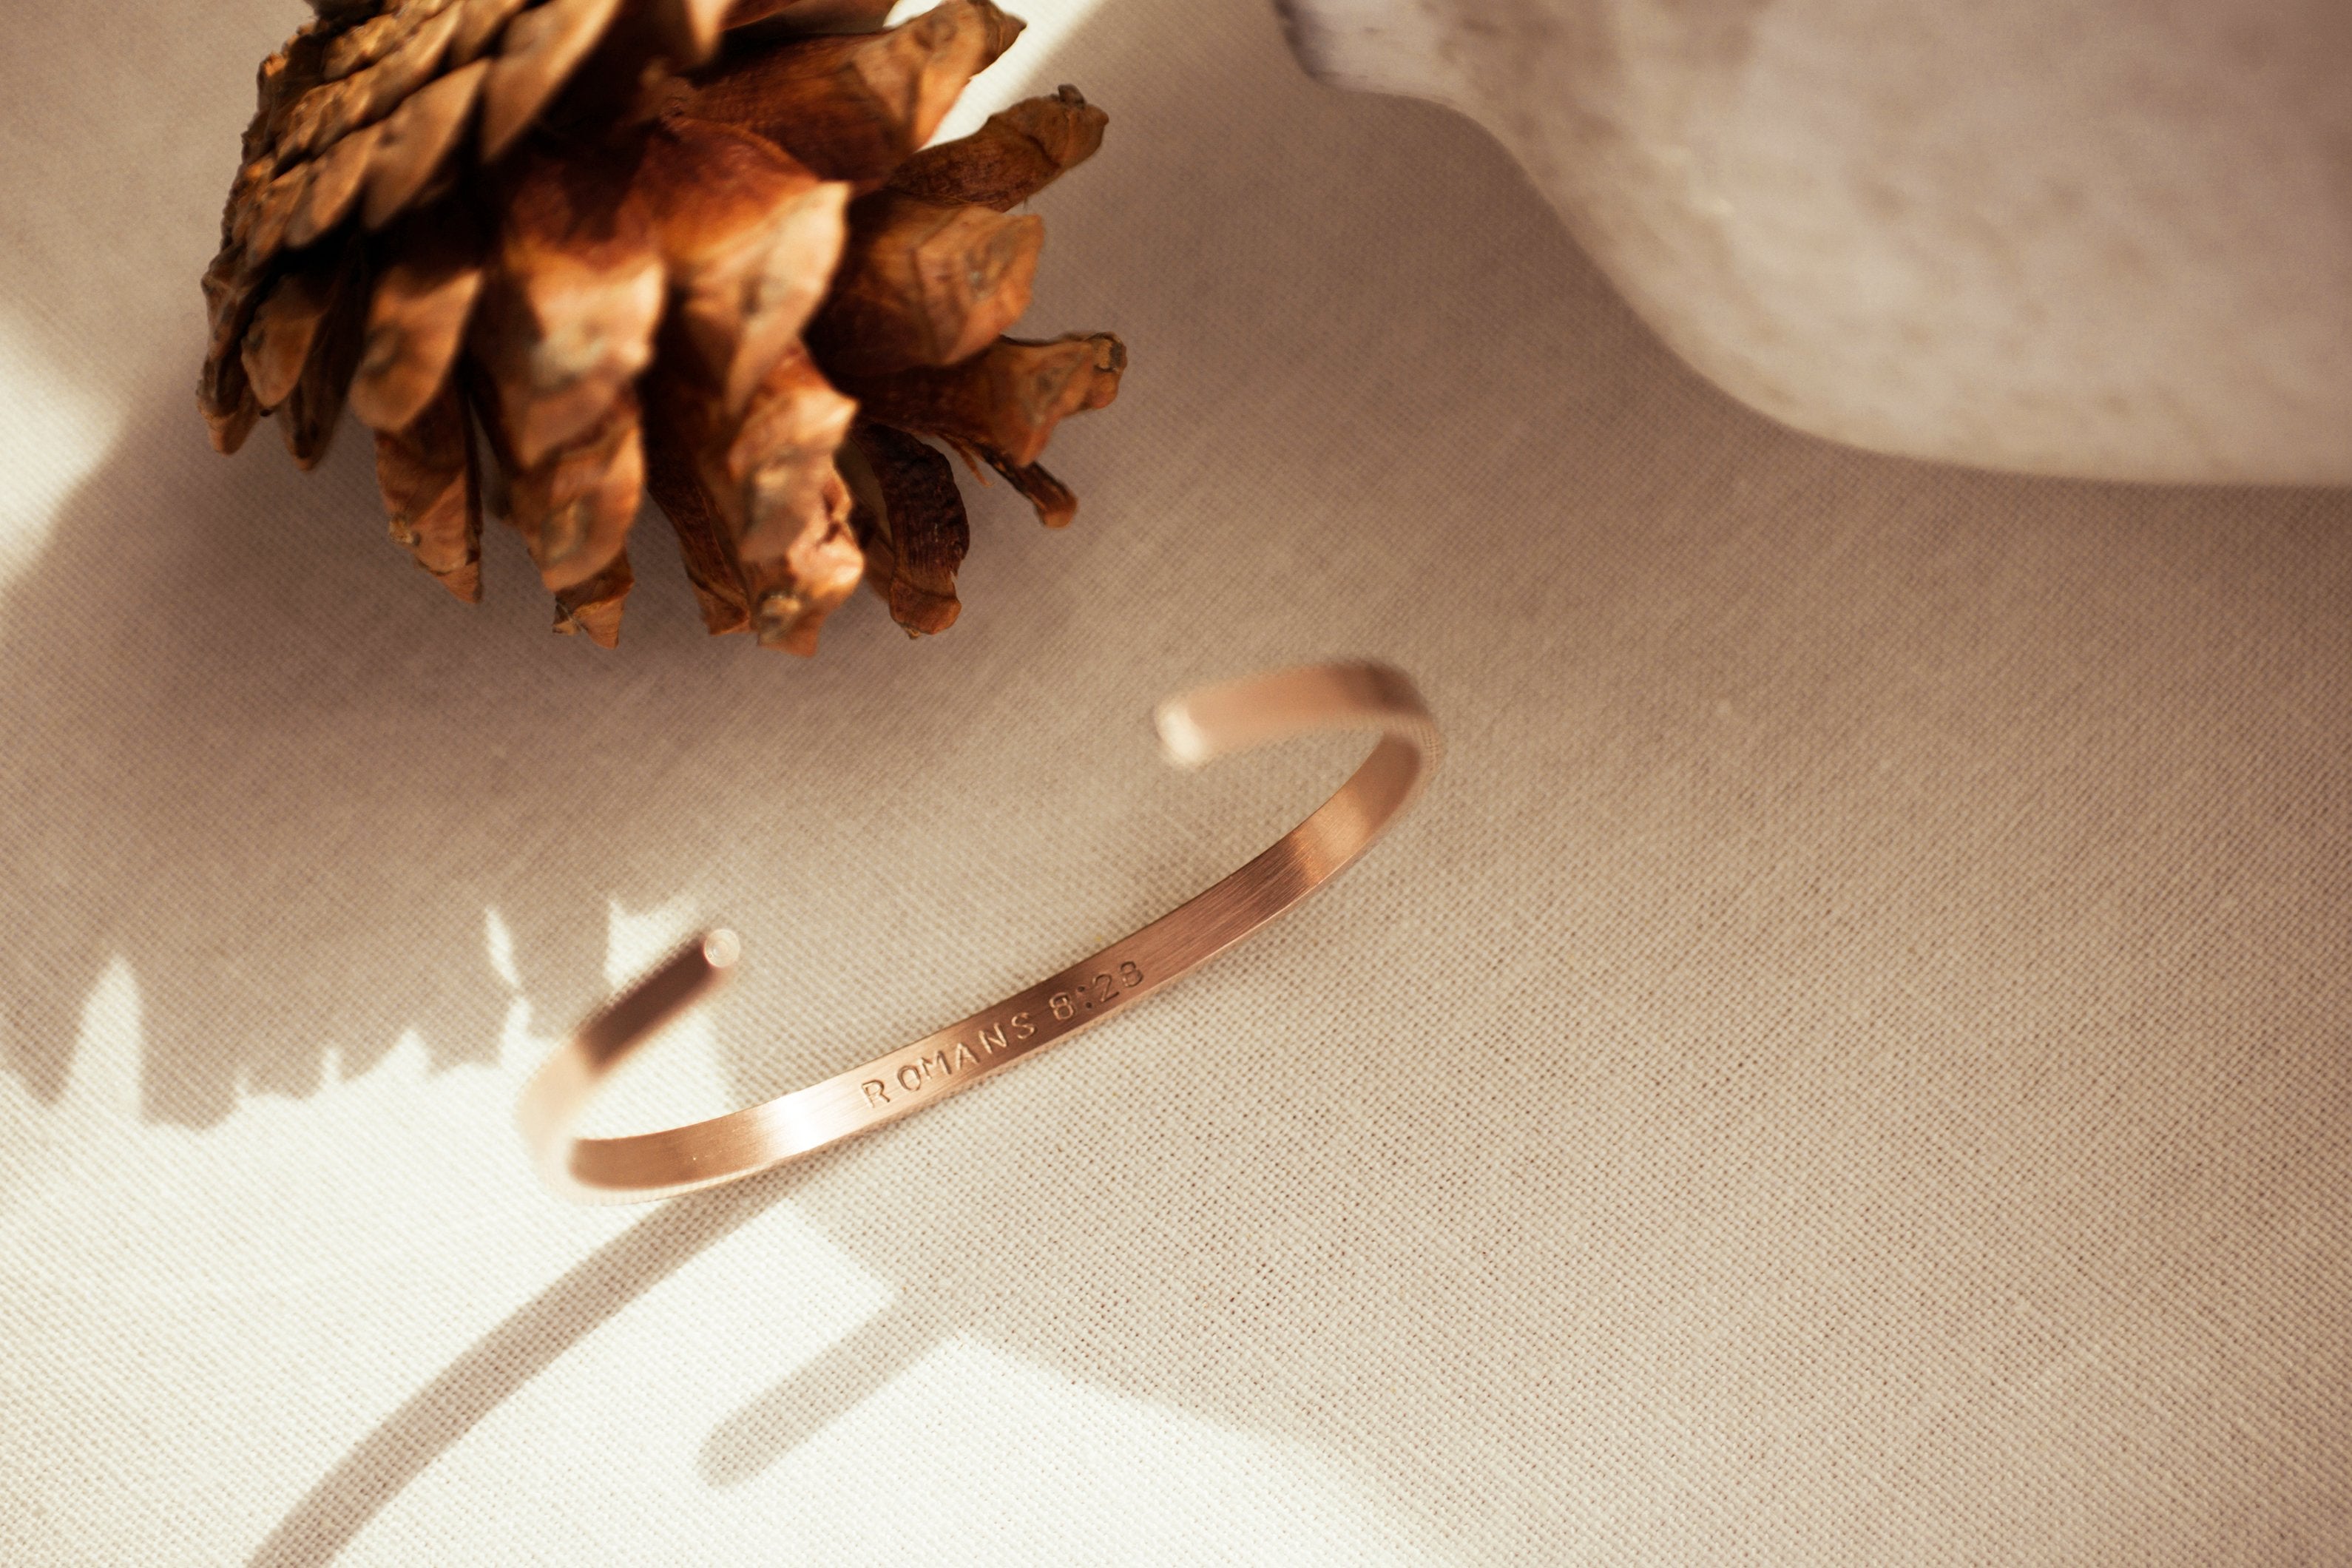 Merci Structured Cuff - Rose Gold with inner-center stamped text